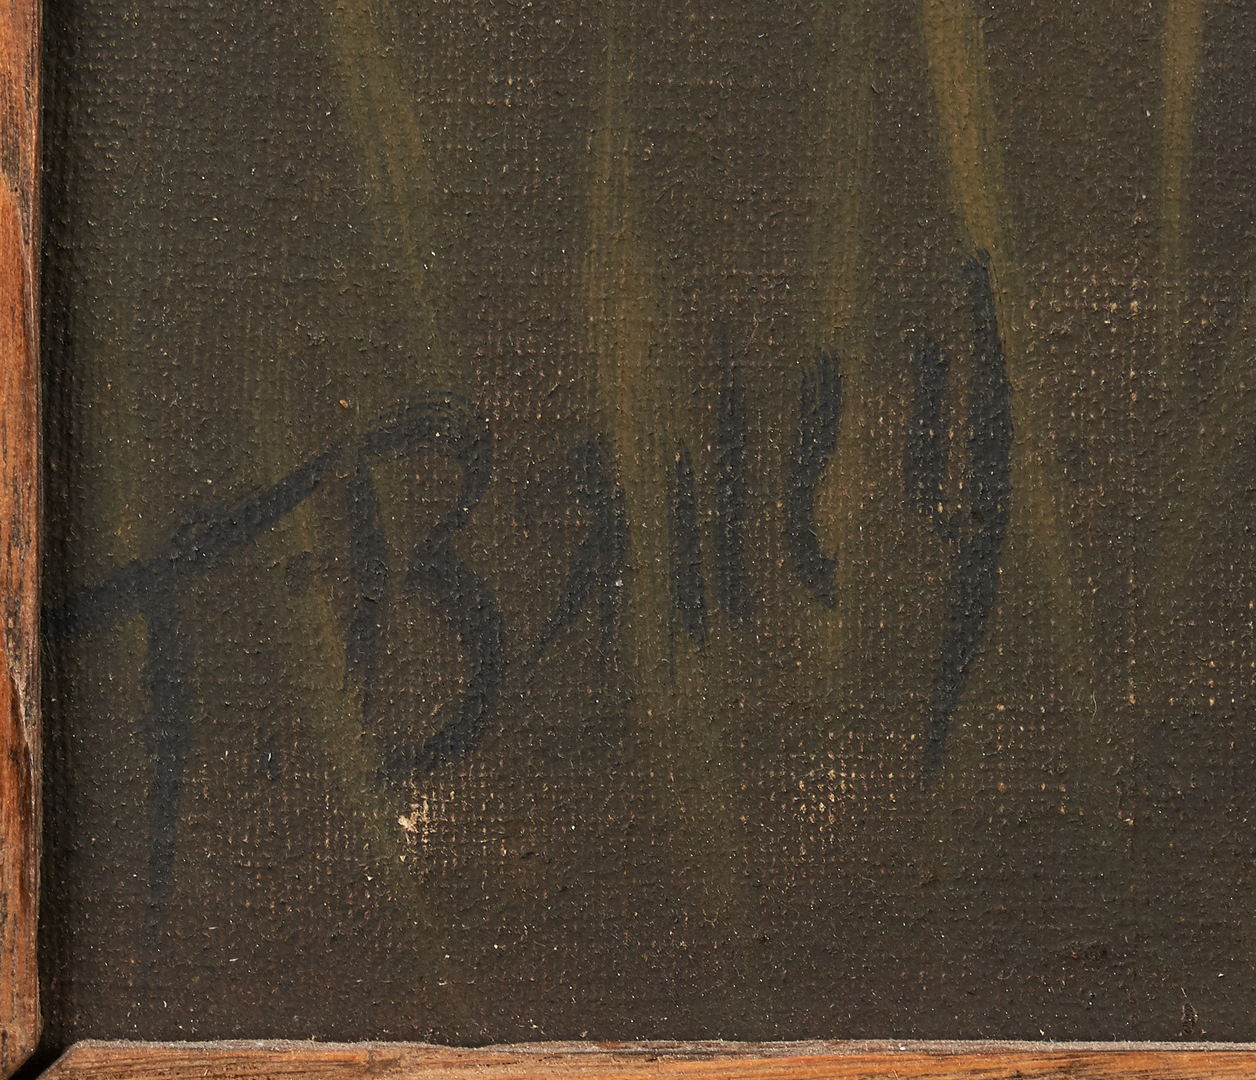 Lot 964: O/C of Hunting Dog, signed T. Bailey